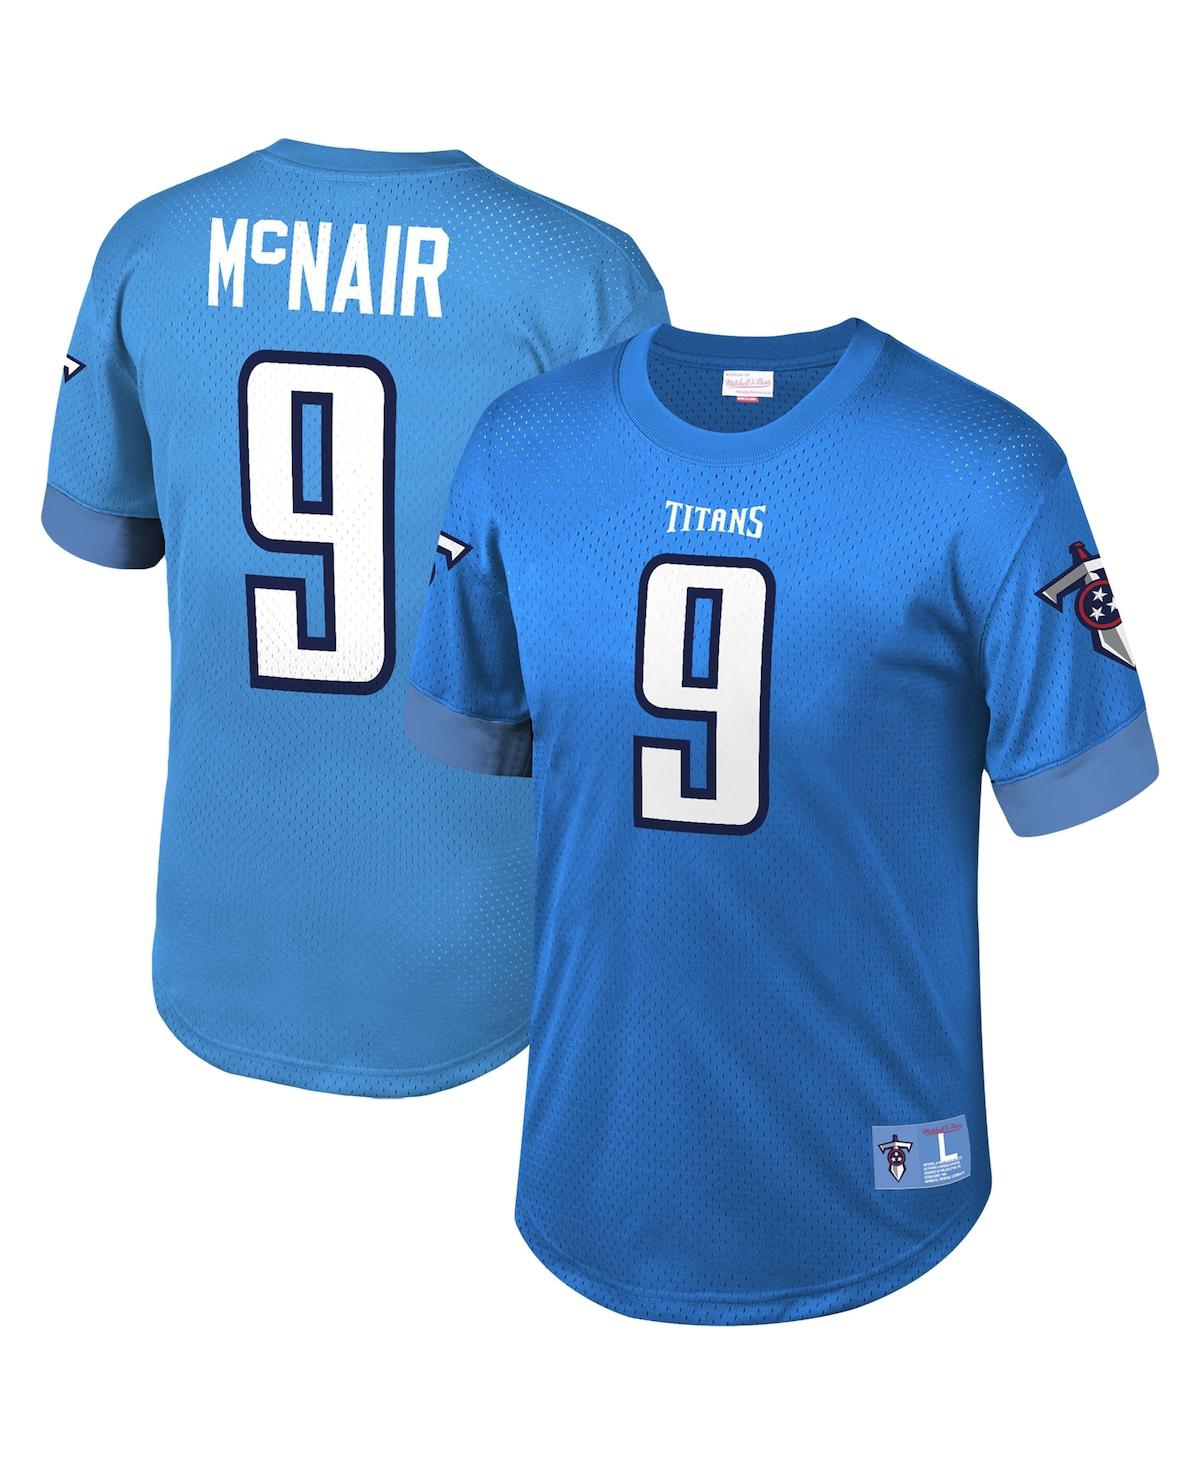 MITCHELL & NESS MEN'S MITCHELL & NESS STEVE MCNAIR LIGHT BLUE TENNESSEE TITANS RETIRED PLAYER NAME AND NUMBER MESH T